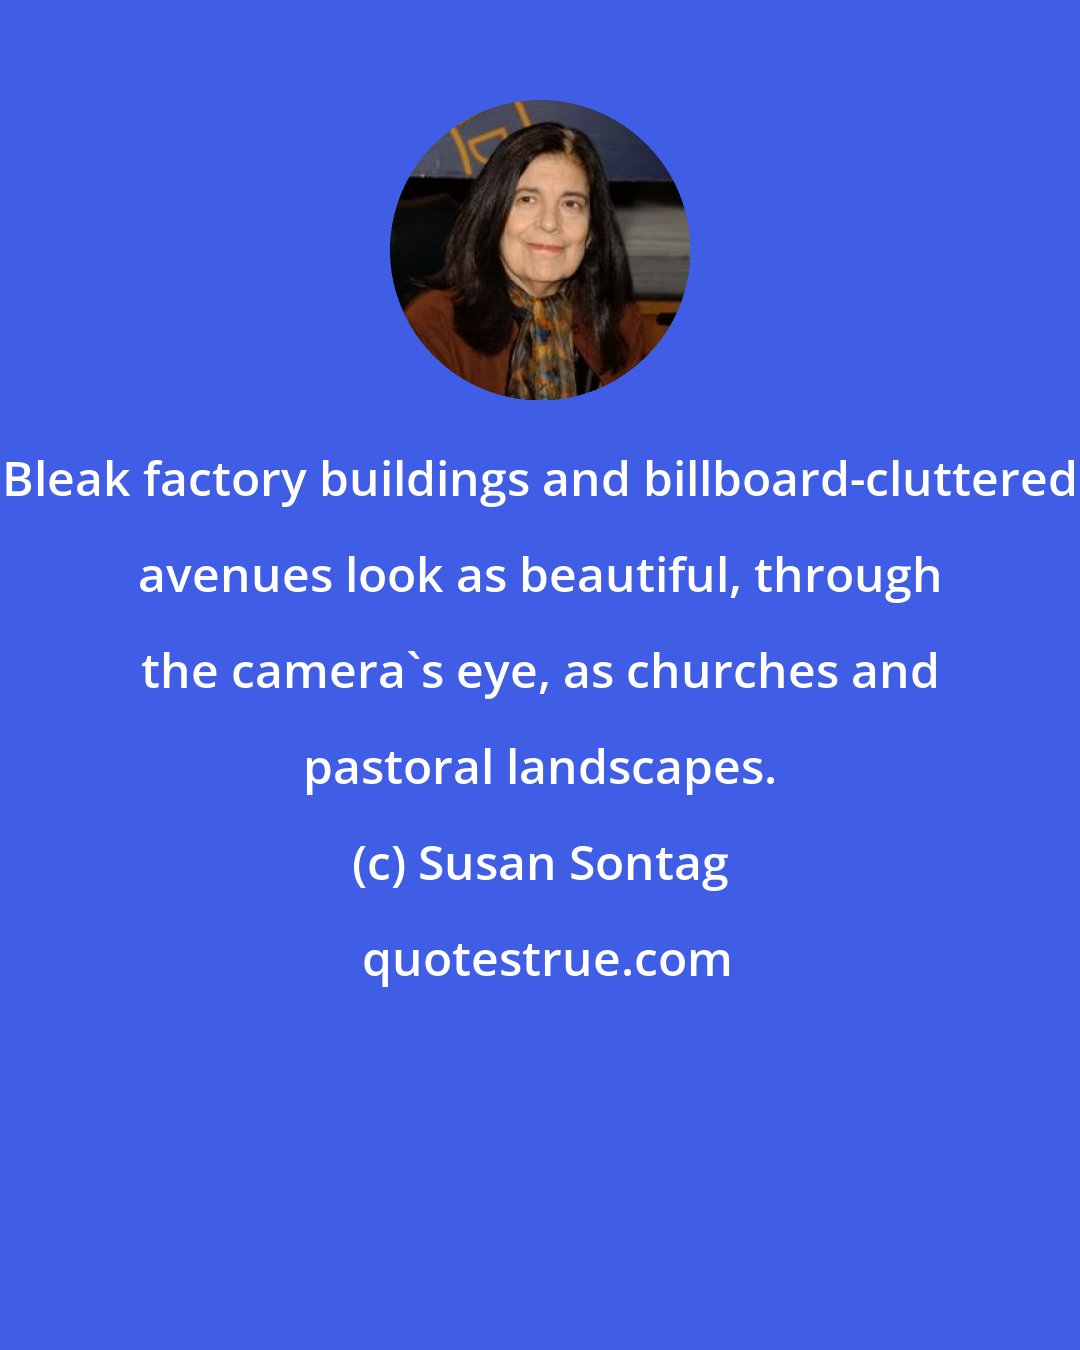 Susan Sontag: Bleak factory buildings and billboard-cluttered avenues look as beautiful, through the camera's eye, as churches and pastoral landscapes.